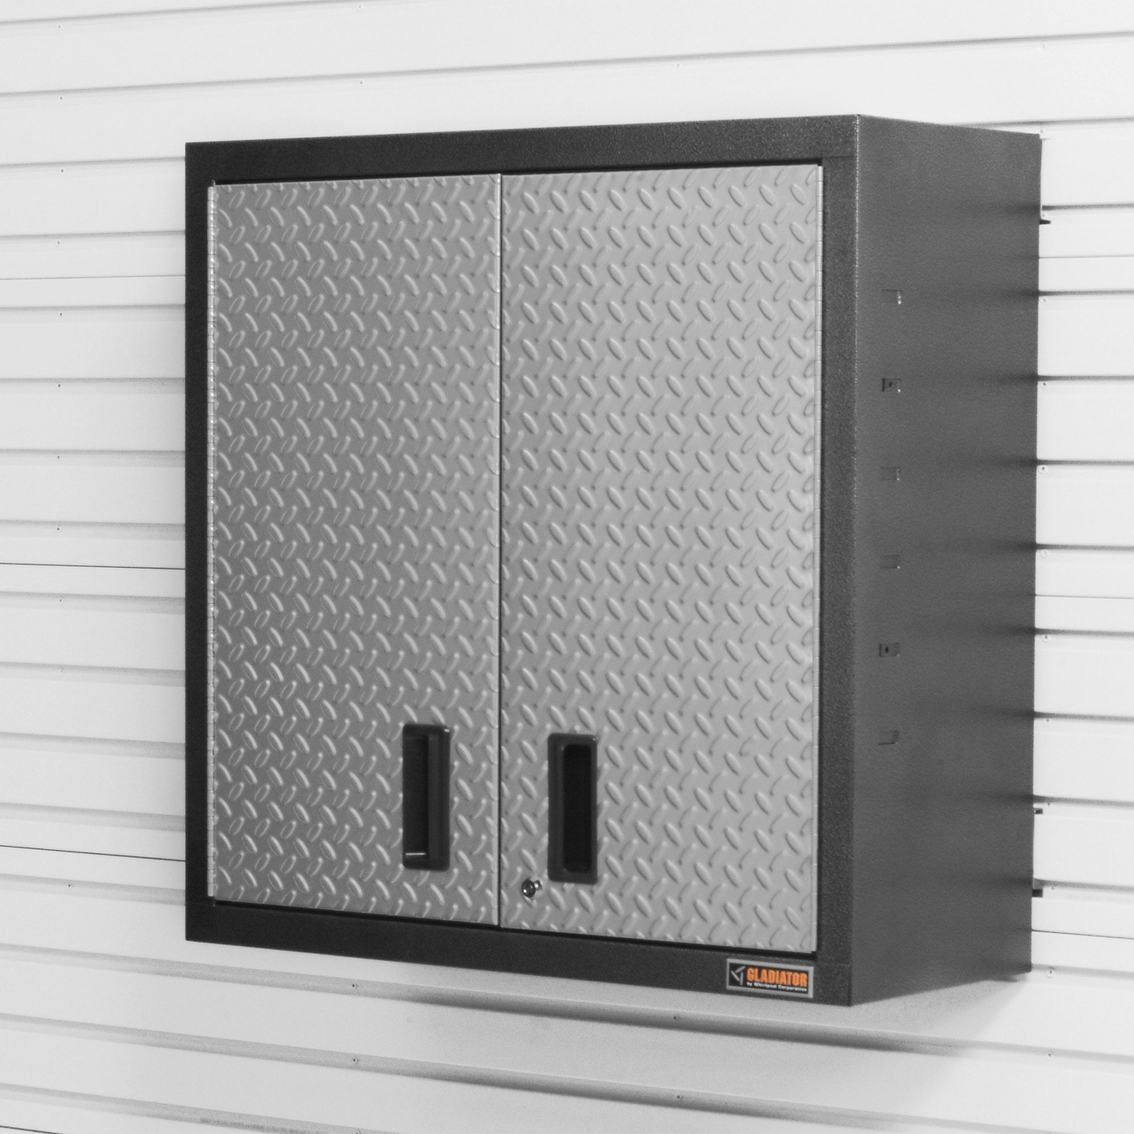 Gladiator Premier 30 In Wall Gearbox Storage Systems More